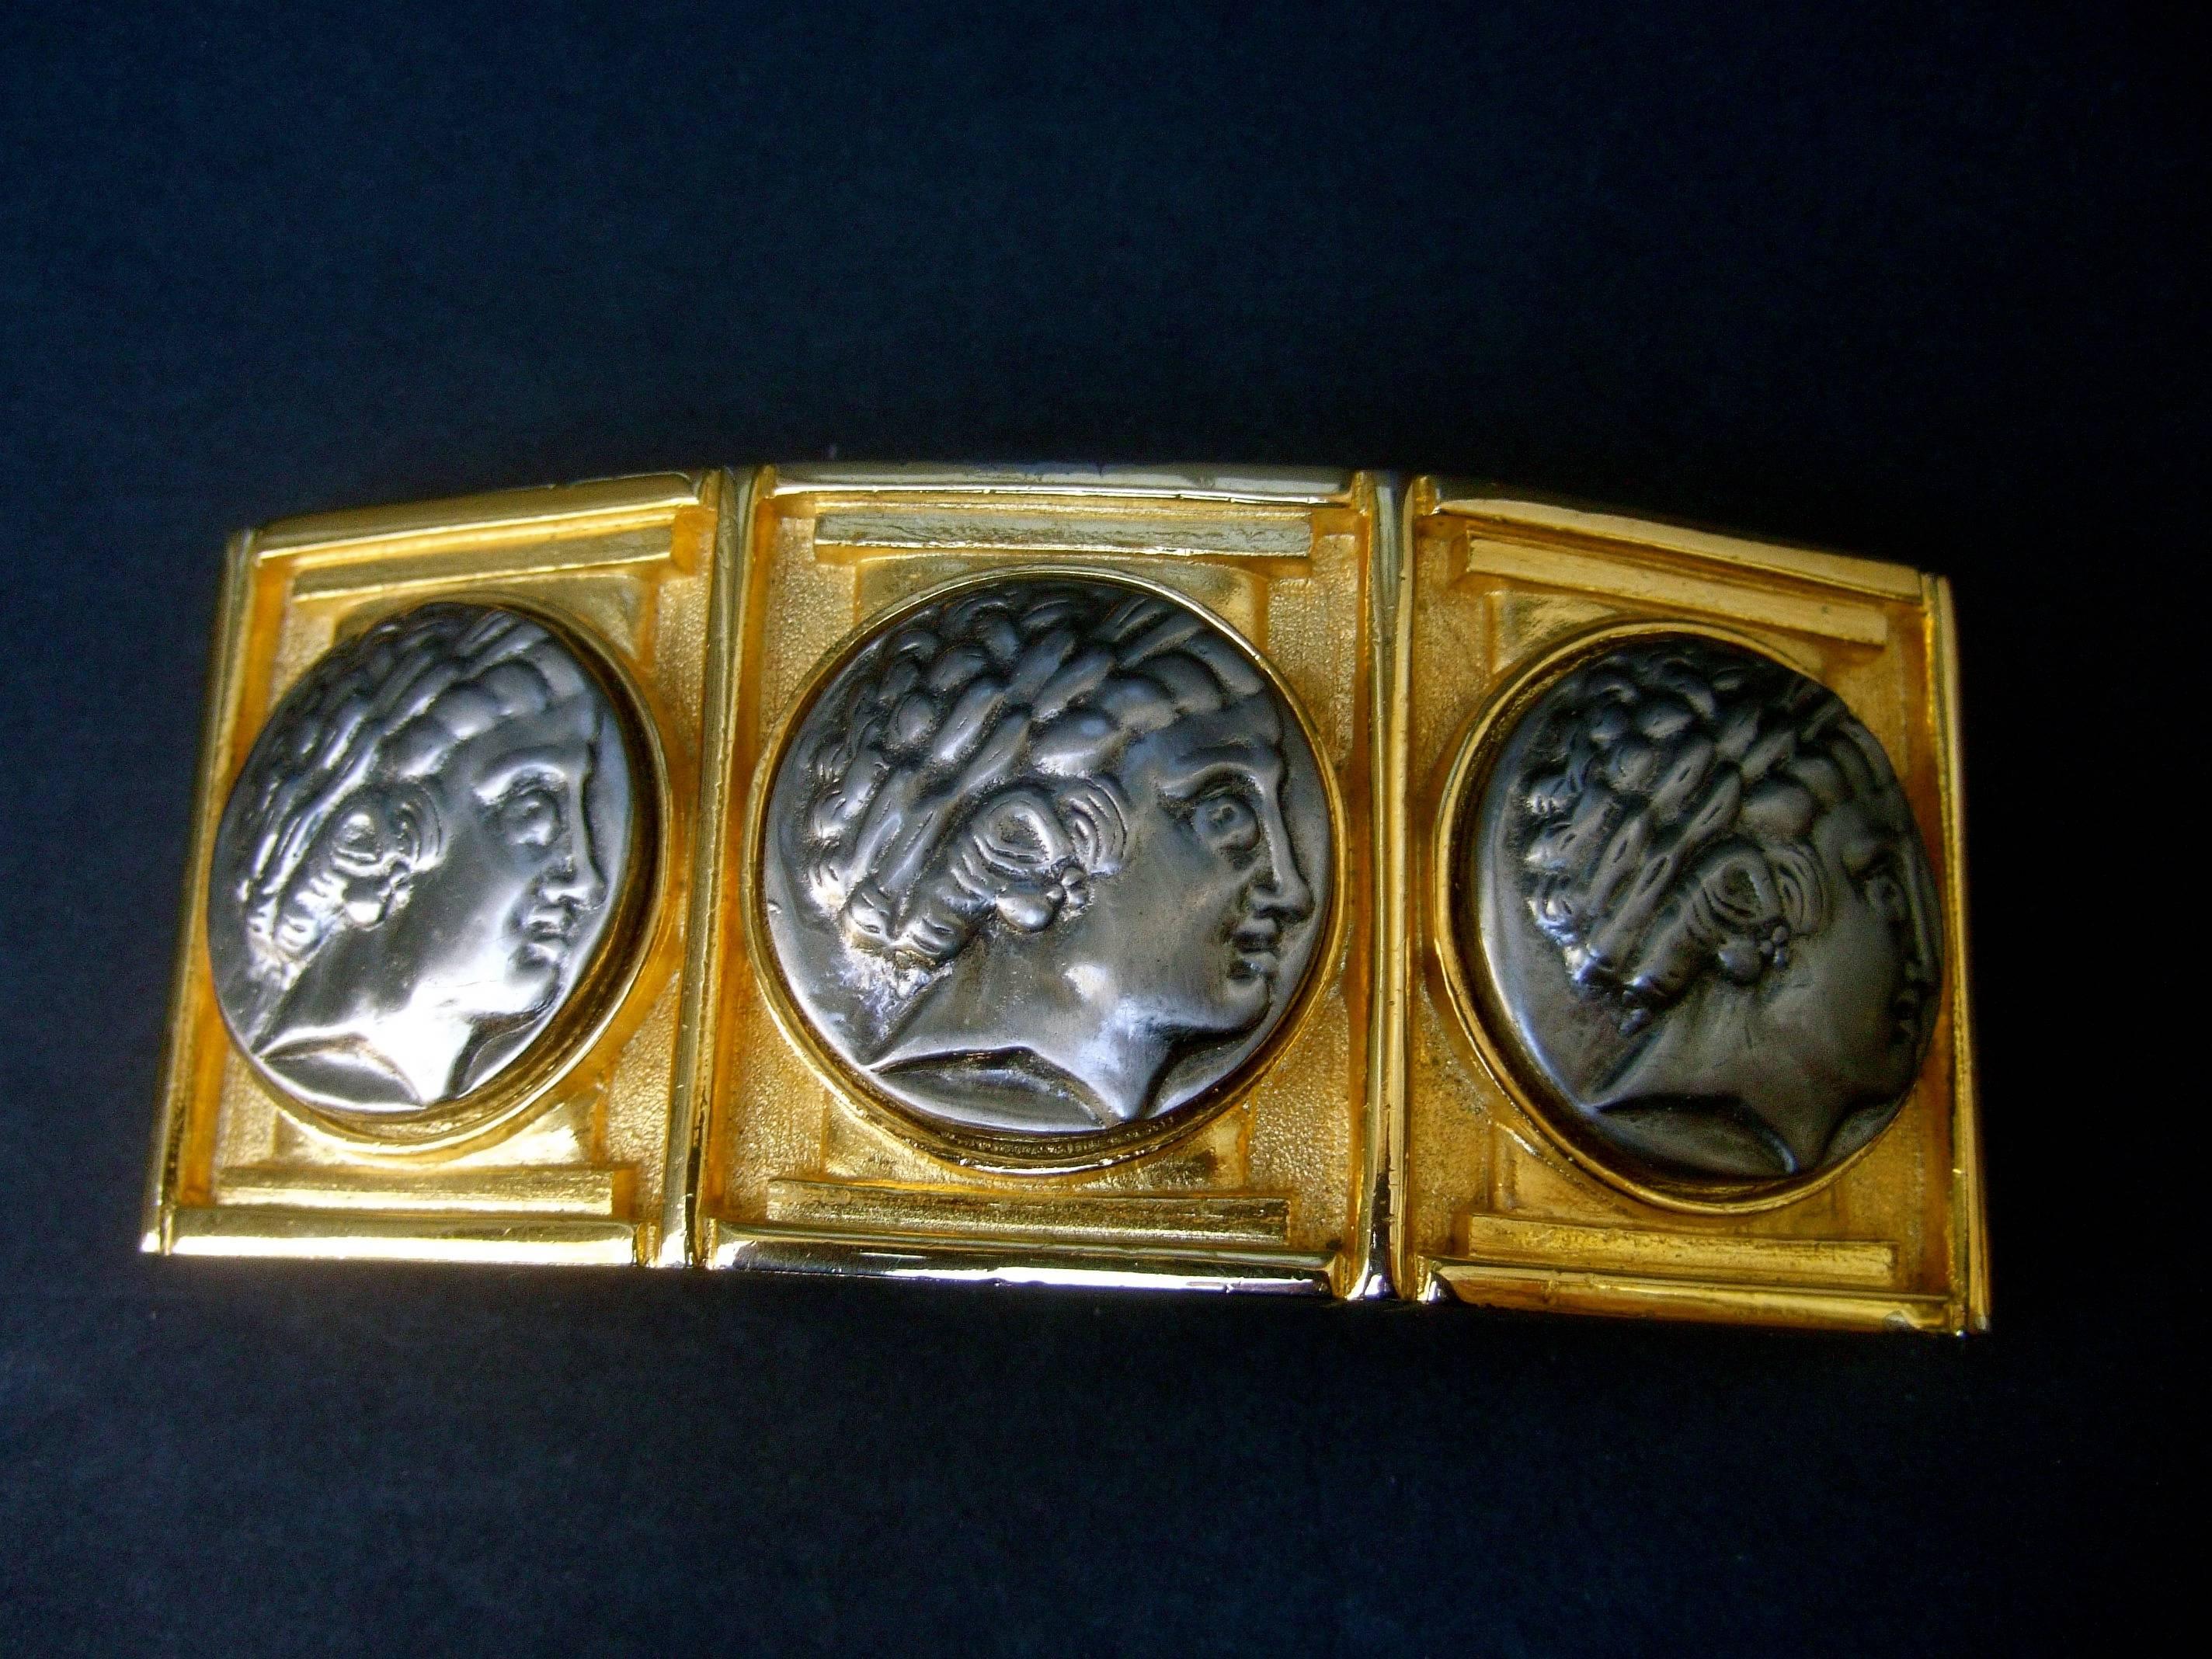 Alexis Kirk Massive gilt metal Roman medallion belt buckle c 1980s
The unique huge scale belt buckle is adorned with a trio 
of Roman style figural head medallions in pewter tone metal

The three medallions are soldered onto a large scale gilt
metal